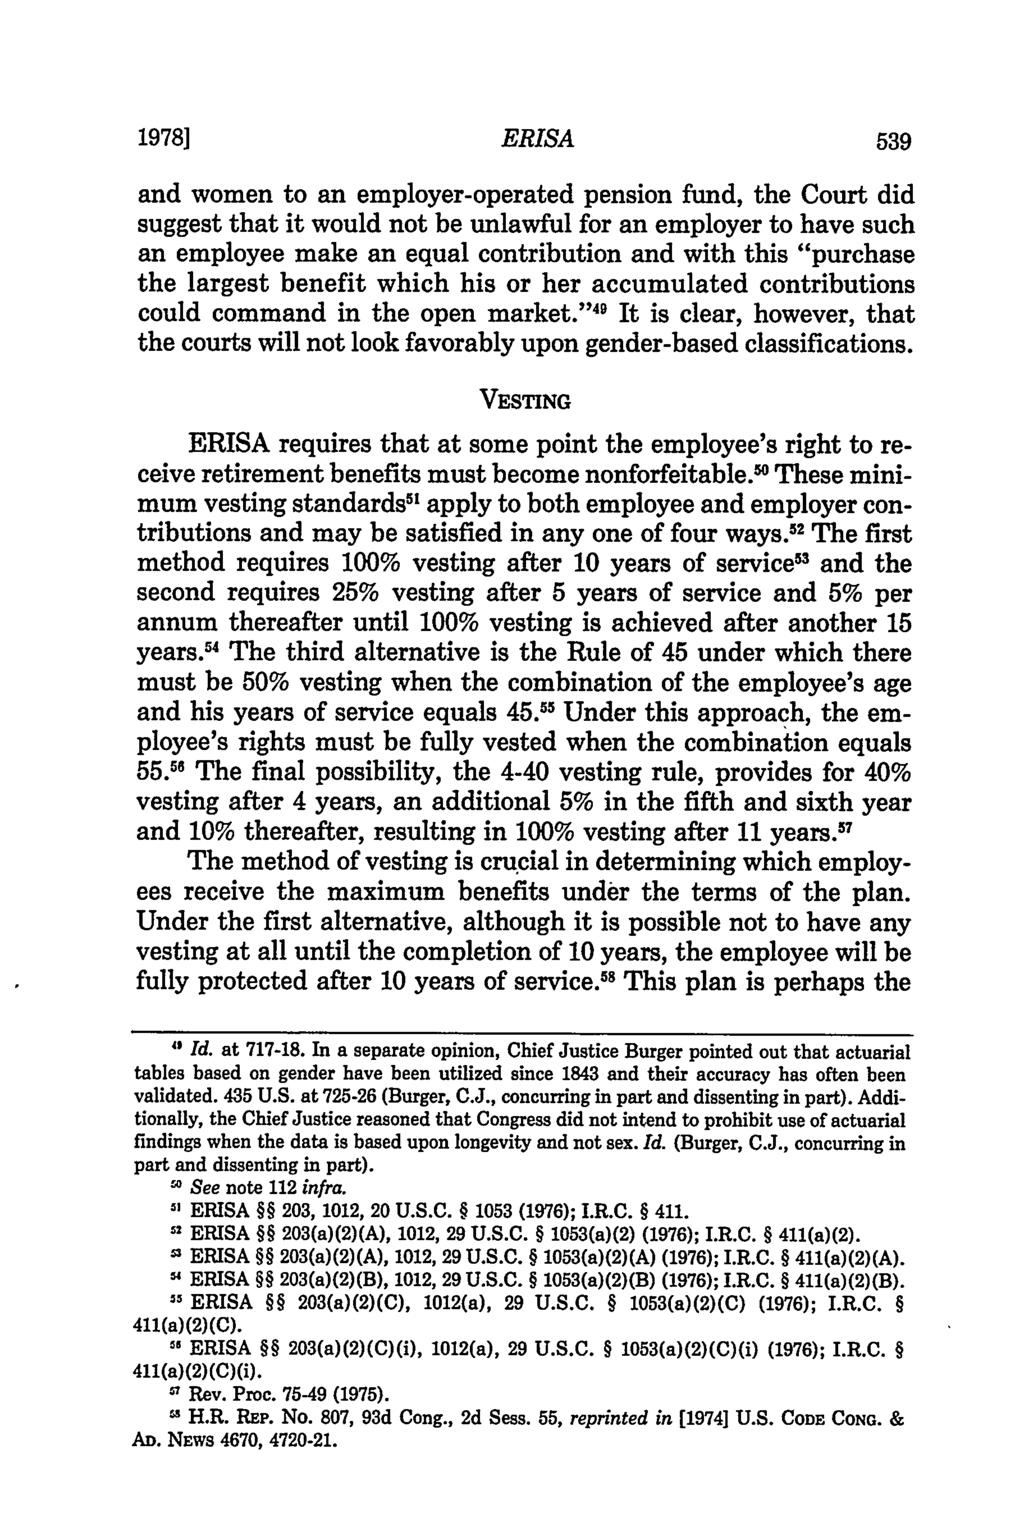 1978] ERISA and women to an employer-operated pension fund, the Court did suggest that it would not be unlawful for an employer to have such an employee make an equal contribution and with this